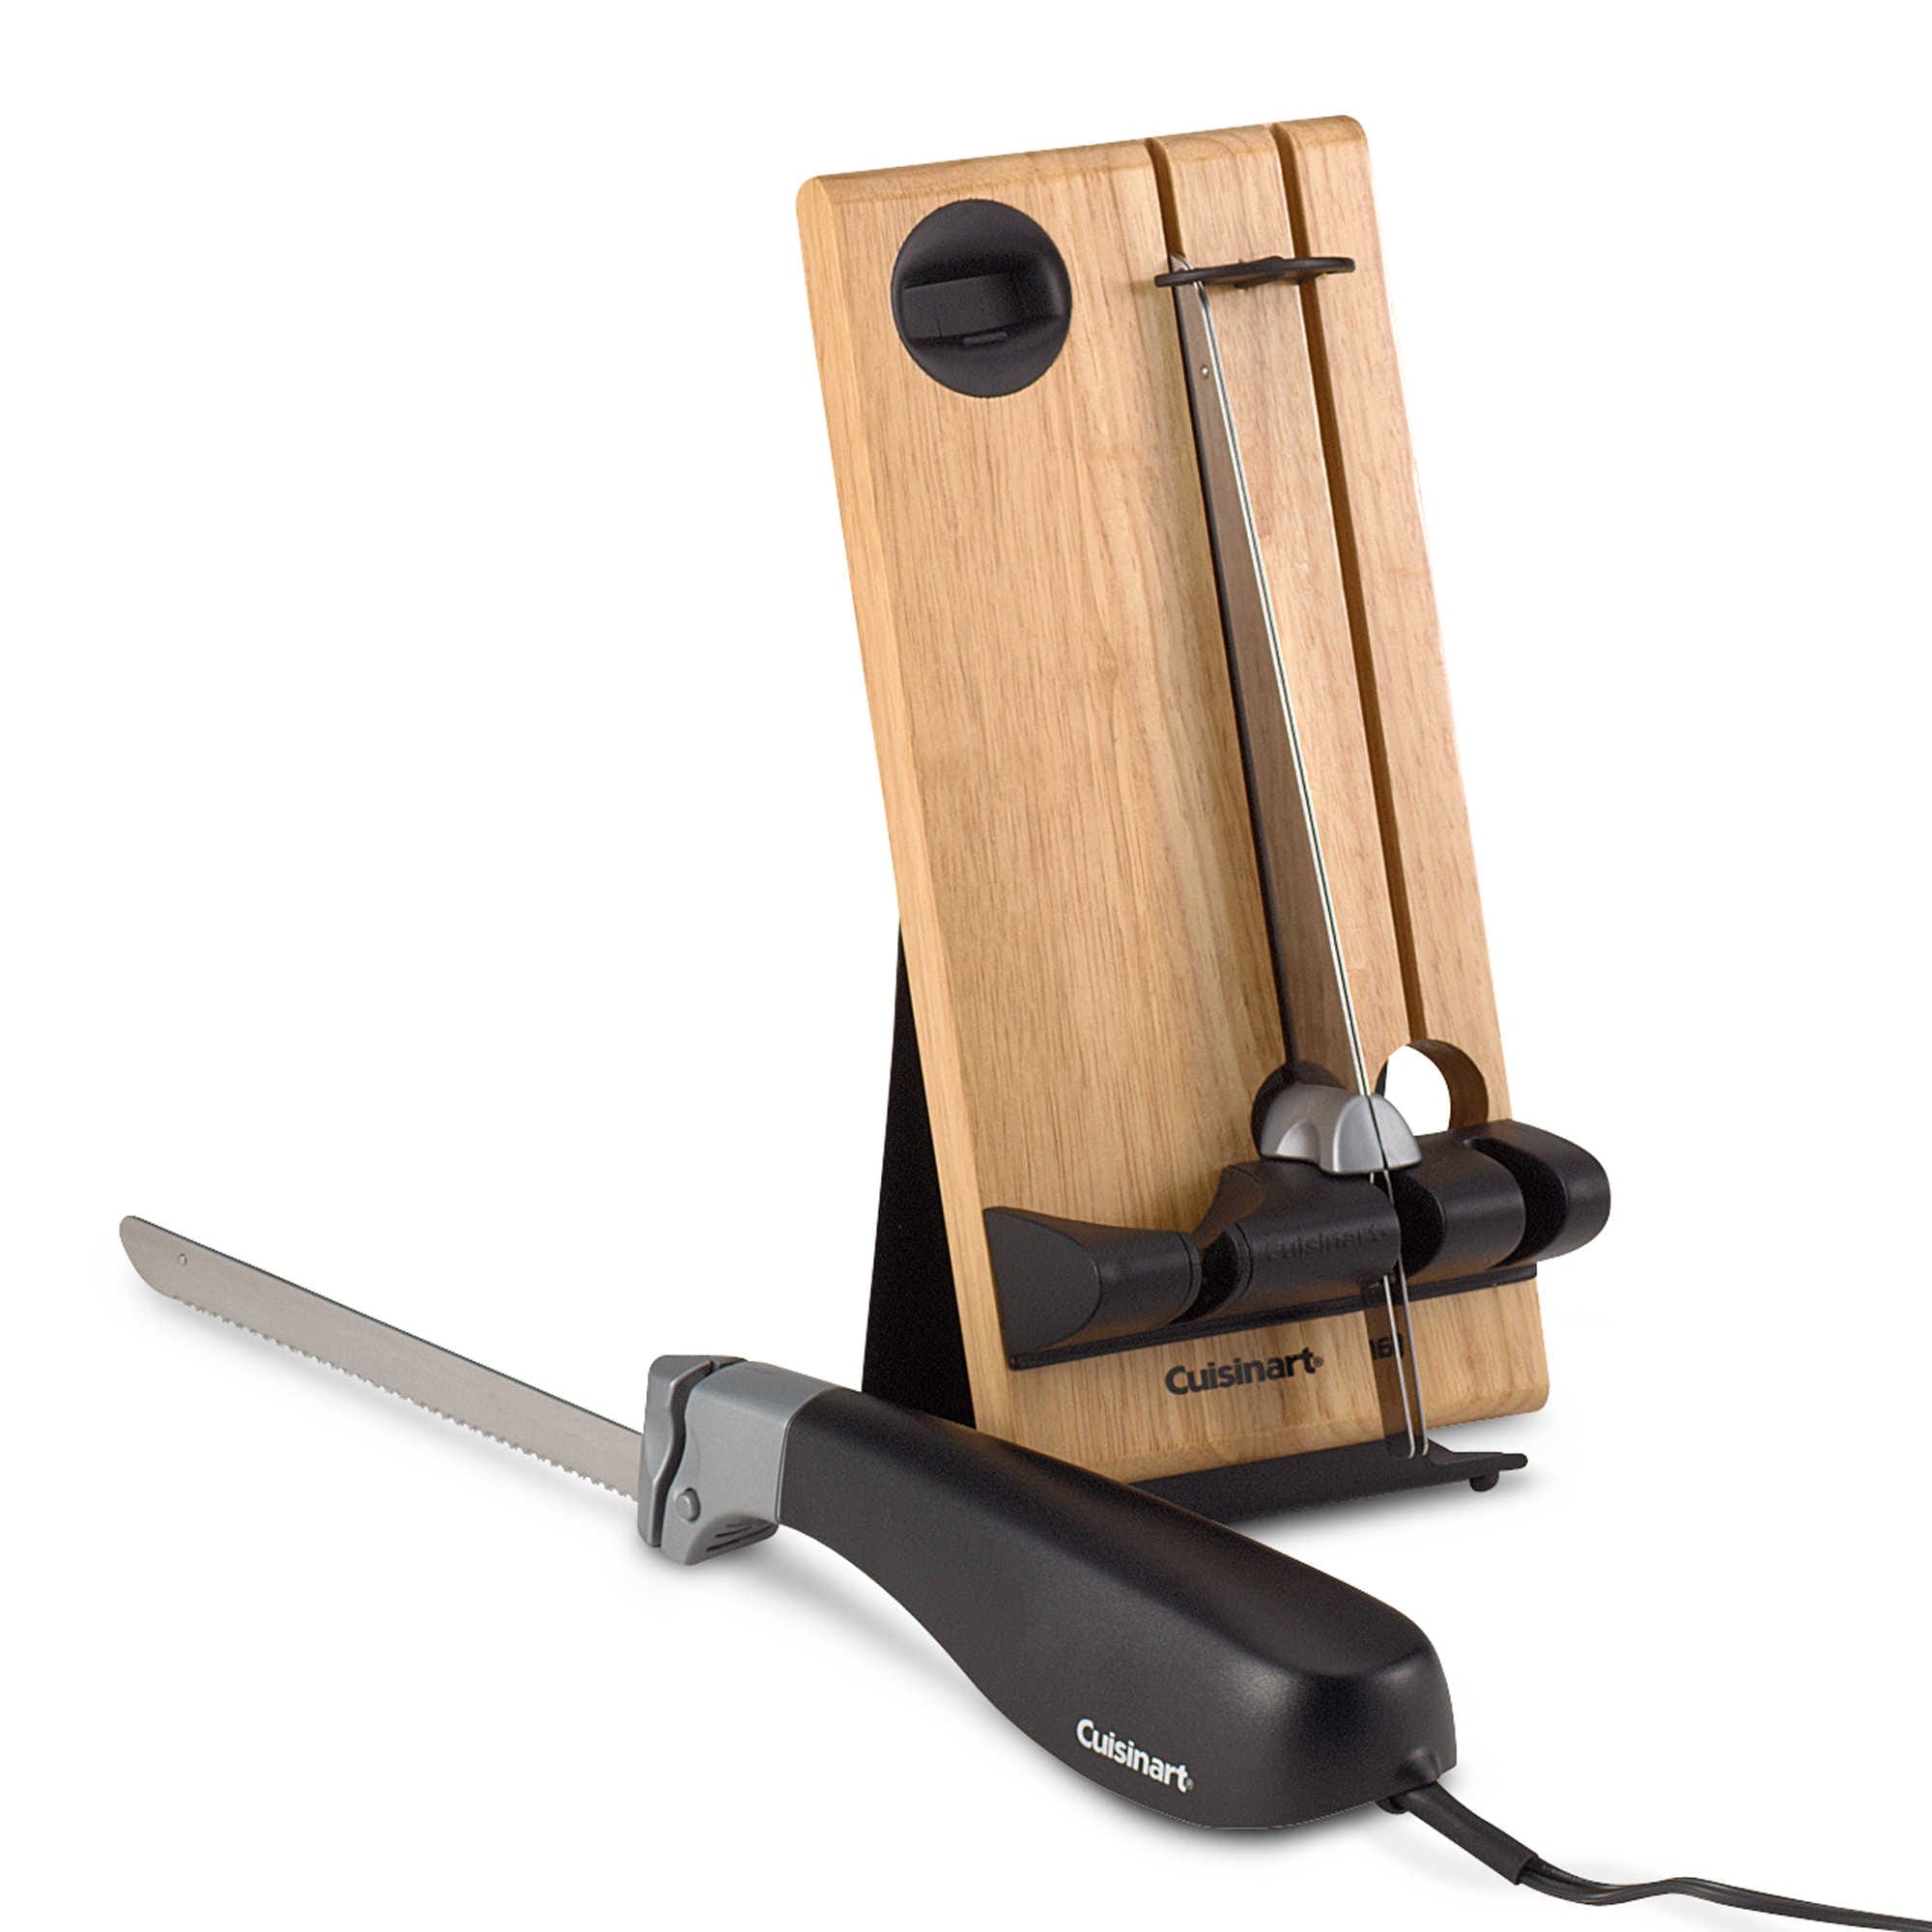 Cuisinart CEK-40 Electric Knife Reviewed And Rated